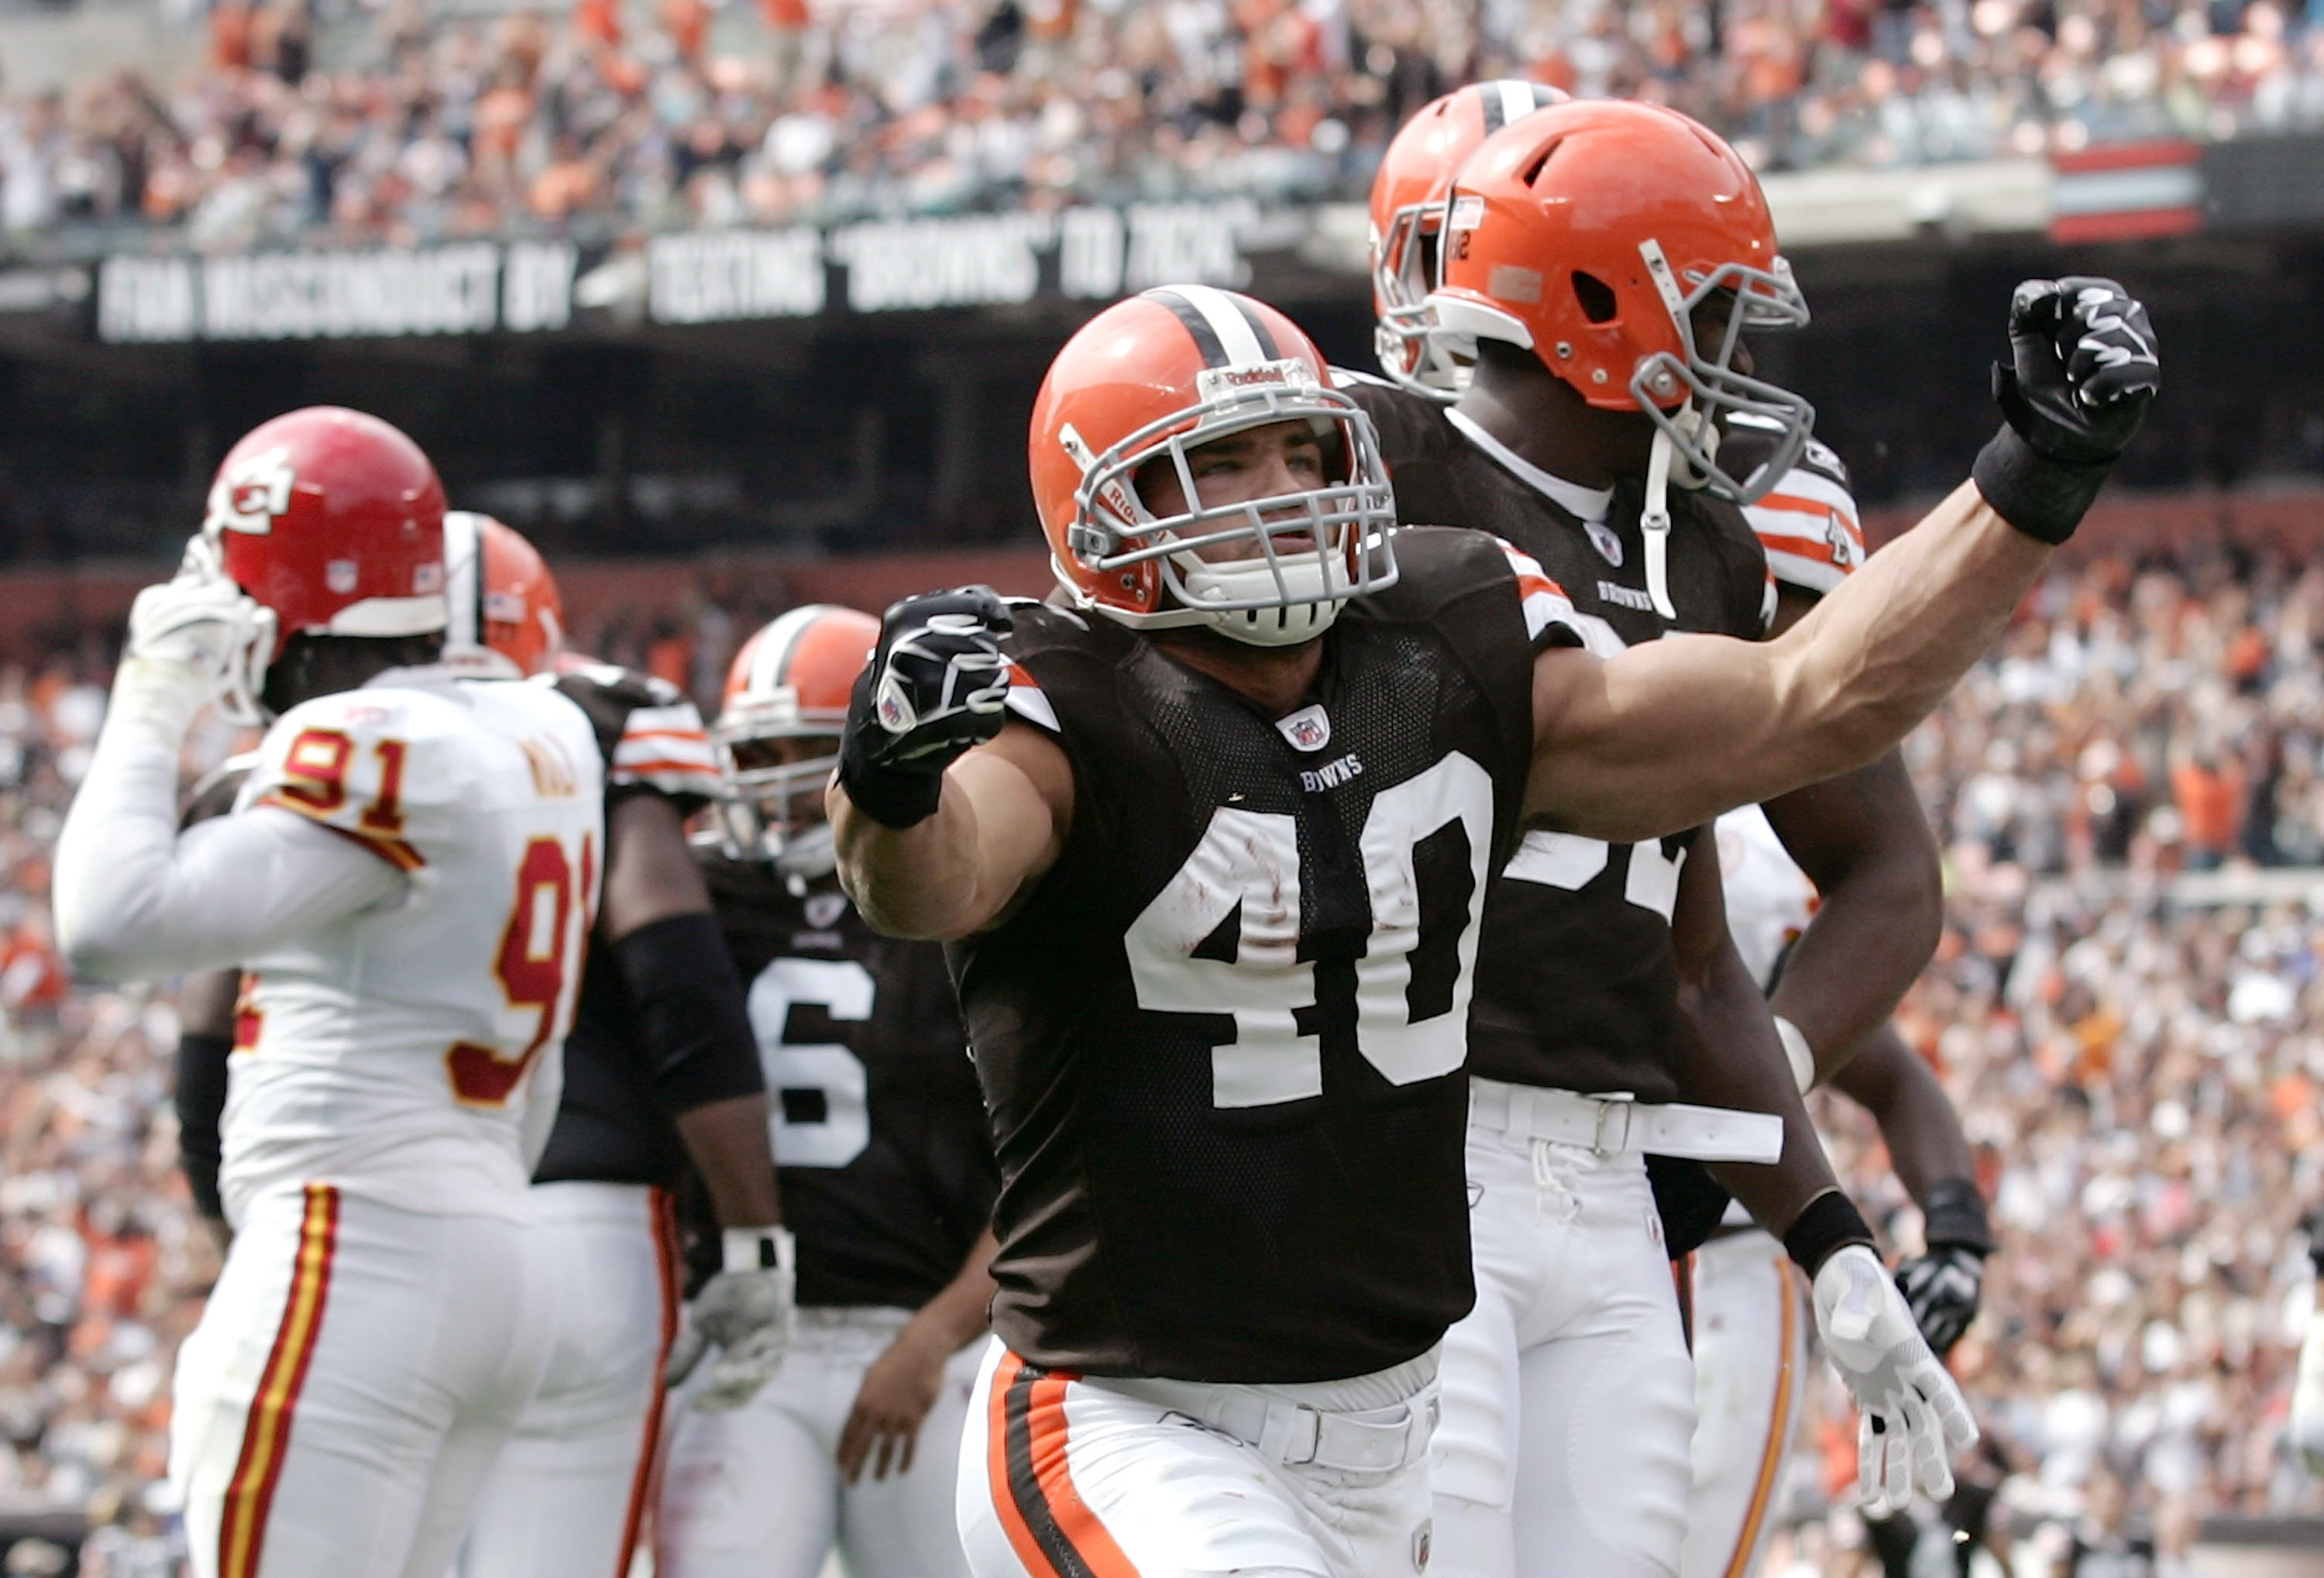 CLEVELAND - SEPTEMBER 19:  Running back Peyton Hillis #40 of the Cleveland Browns celebrates after scoring a touchdown against the Kansas City Chiefs at Cleveland Browns Stadium on September 19, 2010 in Cleveland, Ohio.  (Photo by Matt Sullivan/Getty Imag